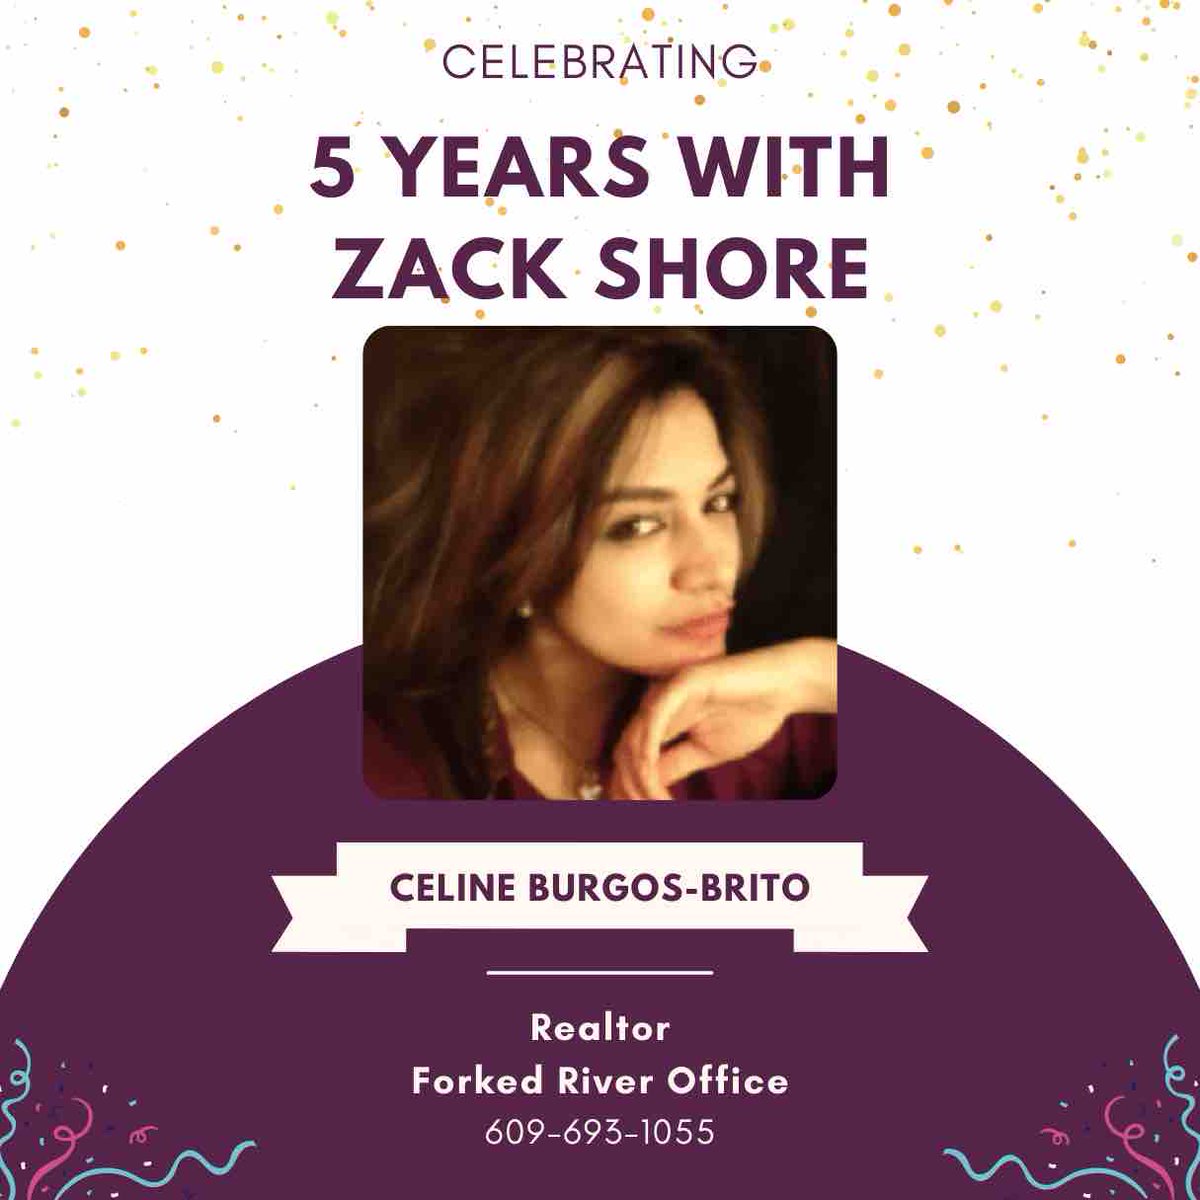 Today we are celebrating Celine Burgos-Brito’s 5th anniversary with BHHS Zack Shore! Please congratulate her! 🎉
#BHHS #BHHSZackShore #BHHSRealEstate #NJRealestate #NJRealtor #WorkAnniversary #FiveYears #ForkedRiverRealEstate